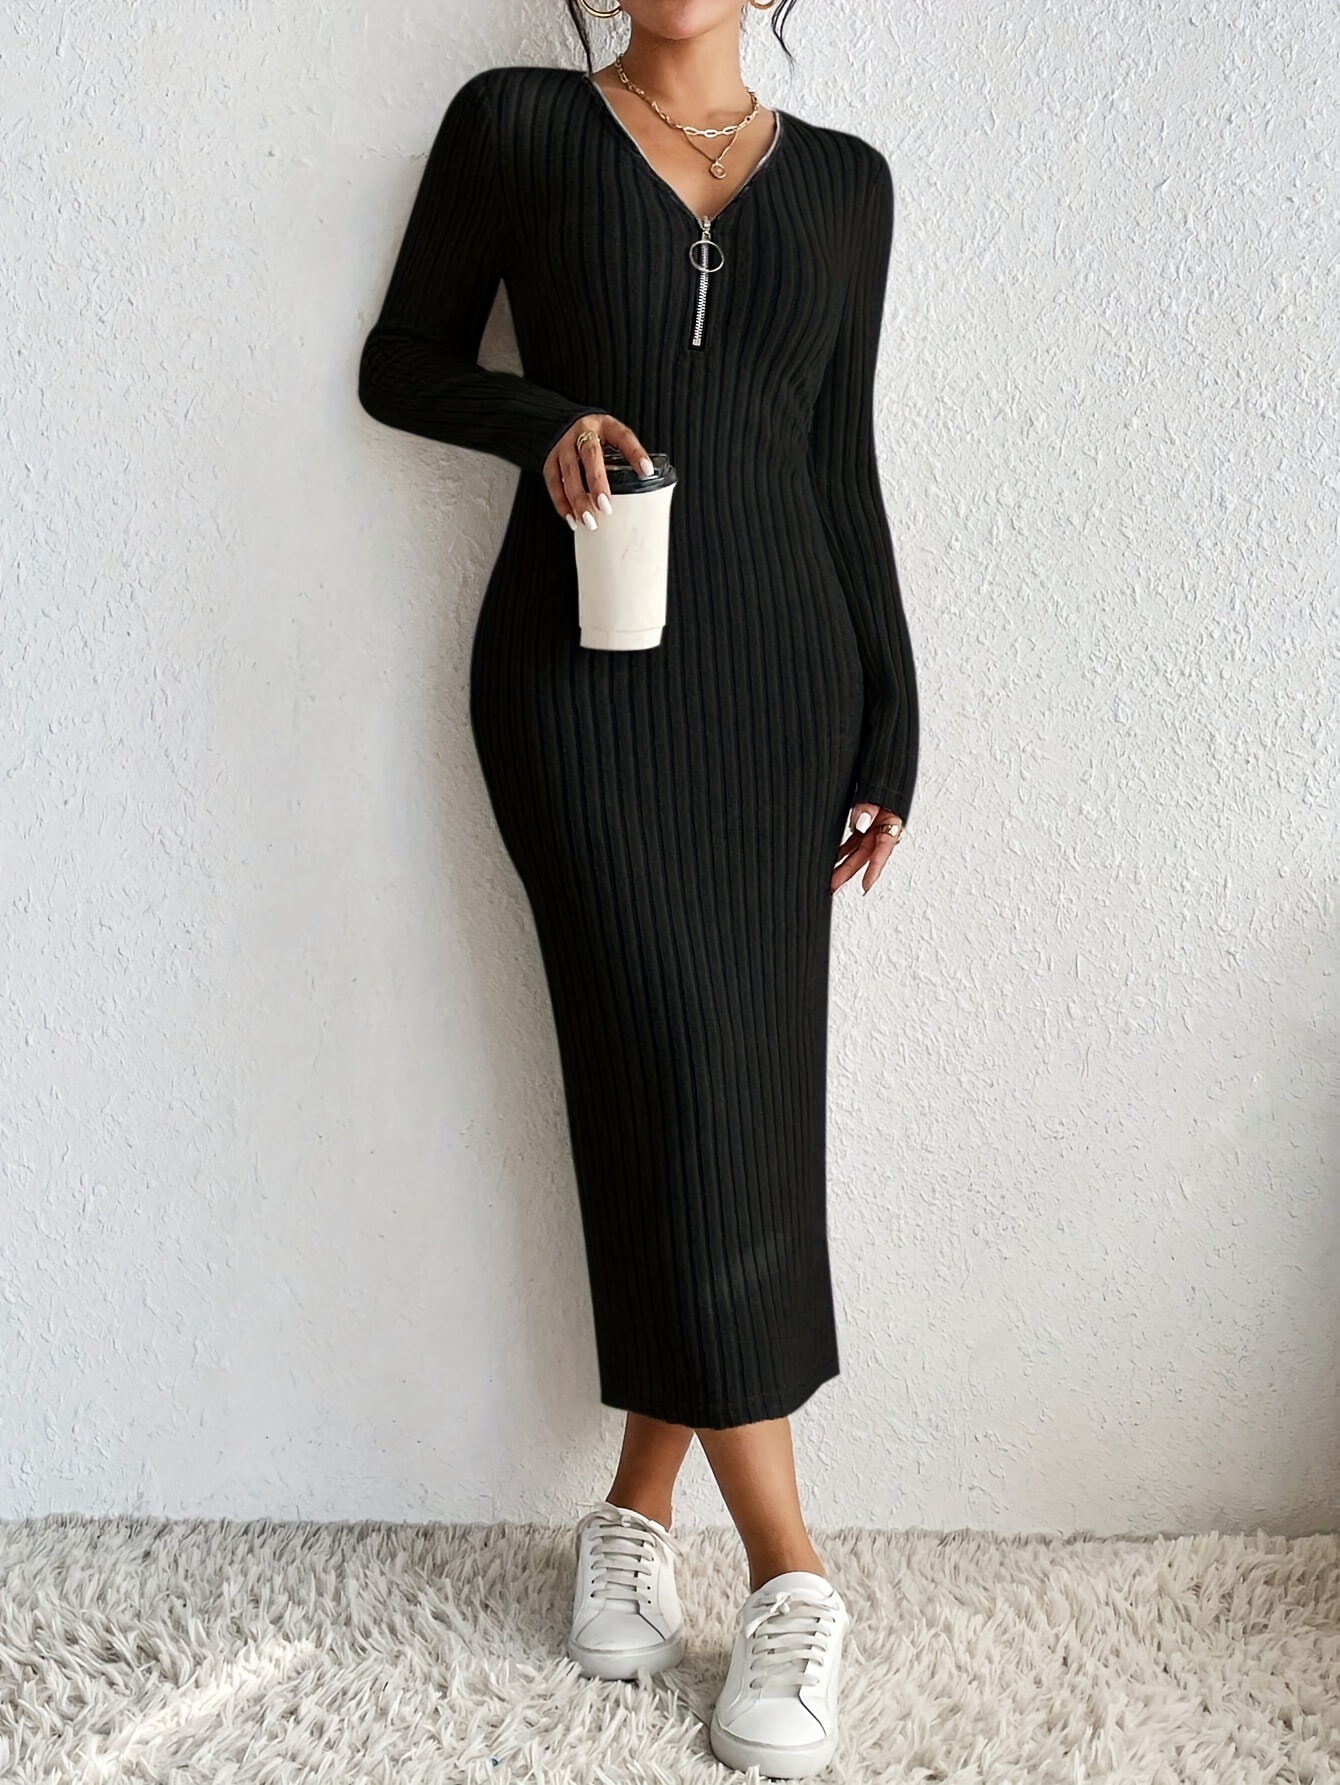 ribbed knit zip up v neck dress chic solid color long sleeve slim dress womens clothing details 5